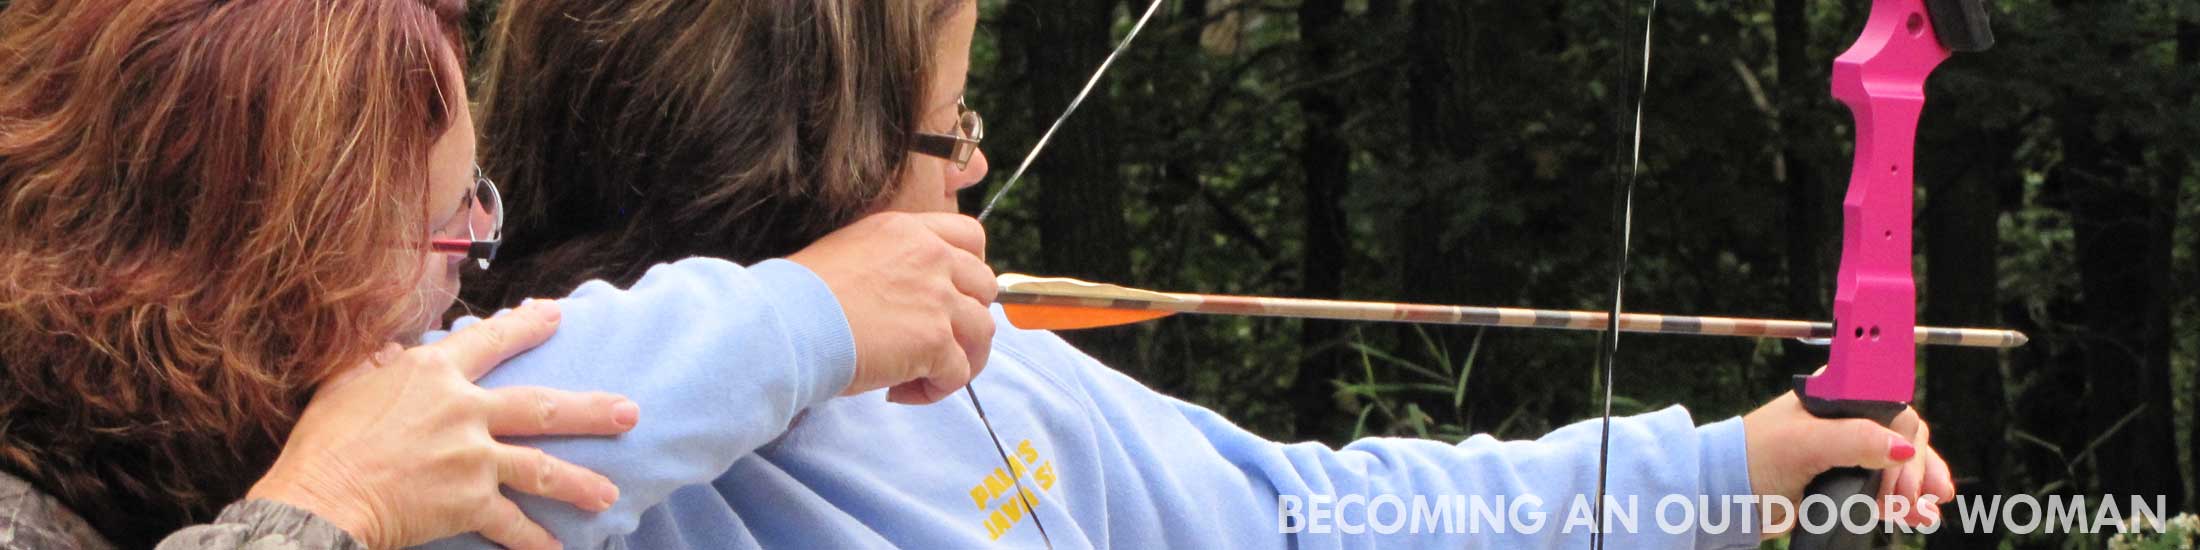 Archery, Becoming an Outdoors Woman workshop